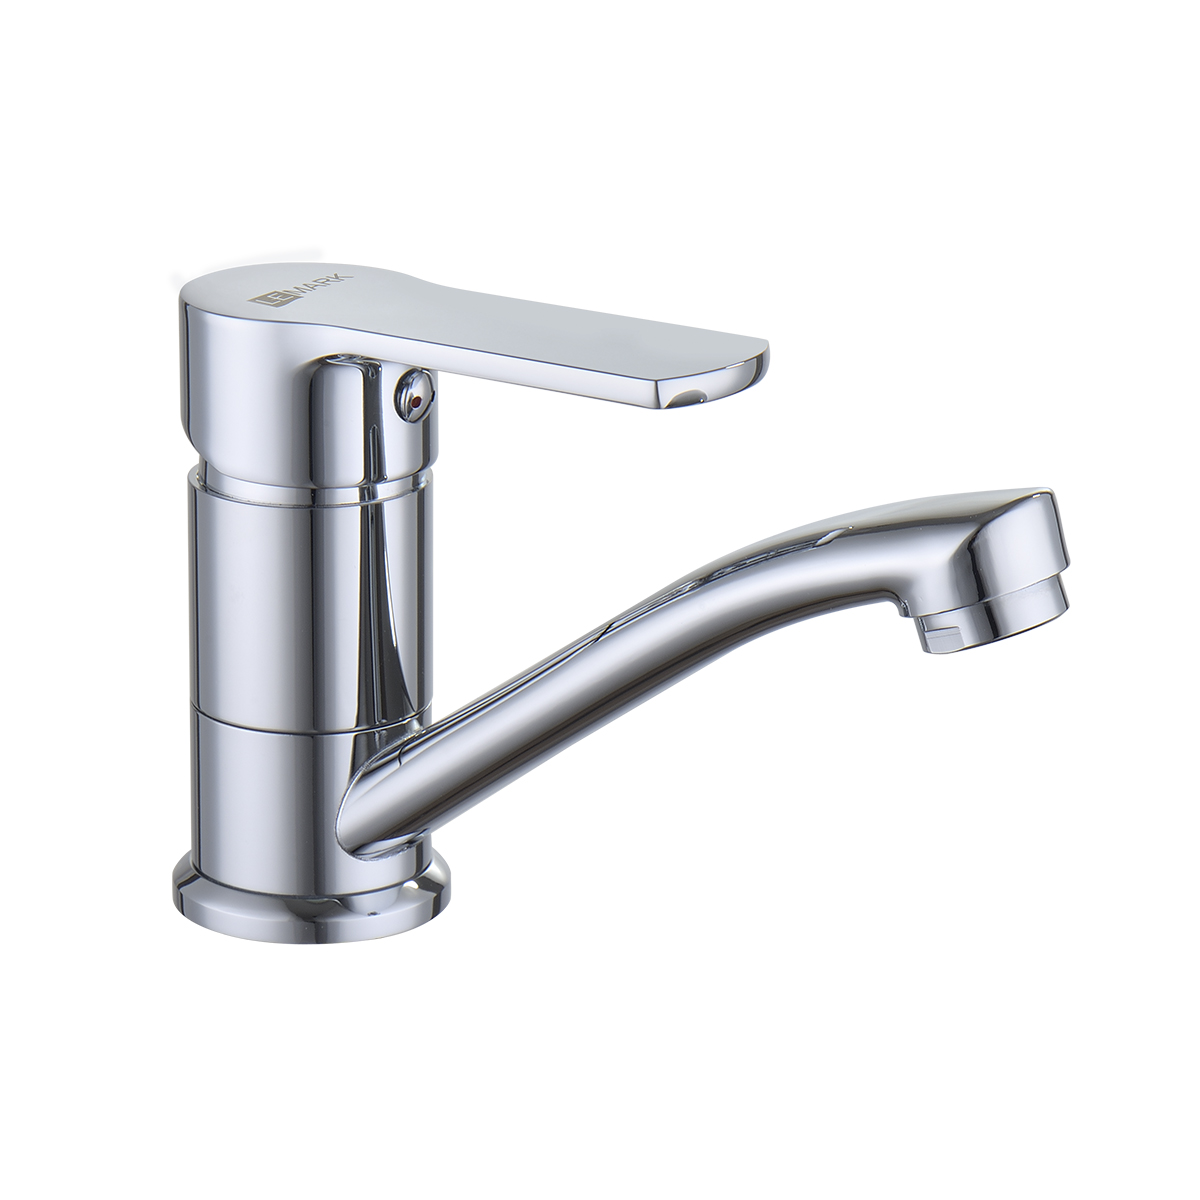 LM1507C Washbasin faucet
with swivel spout